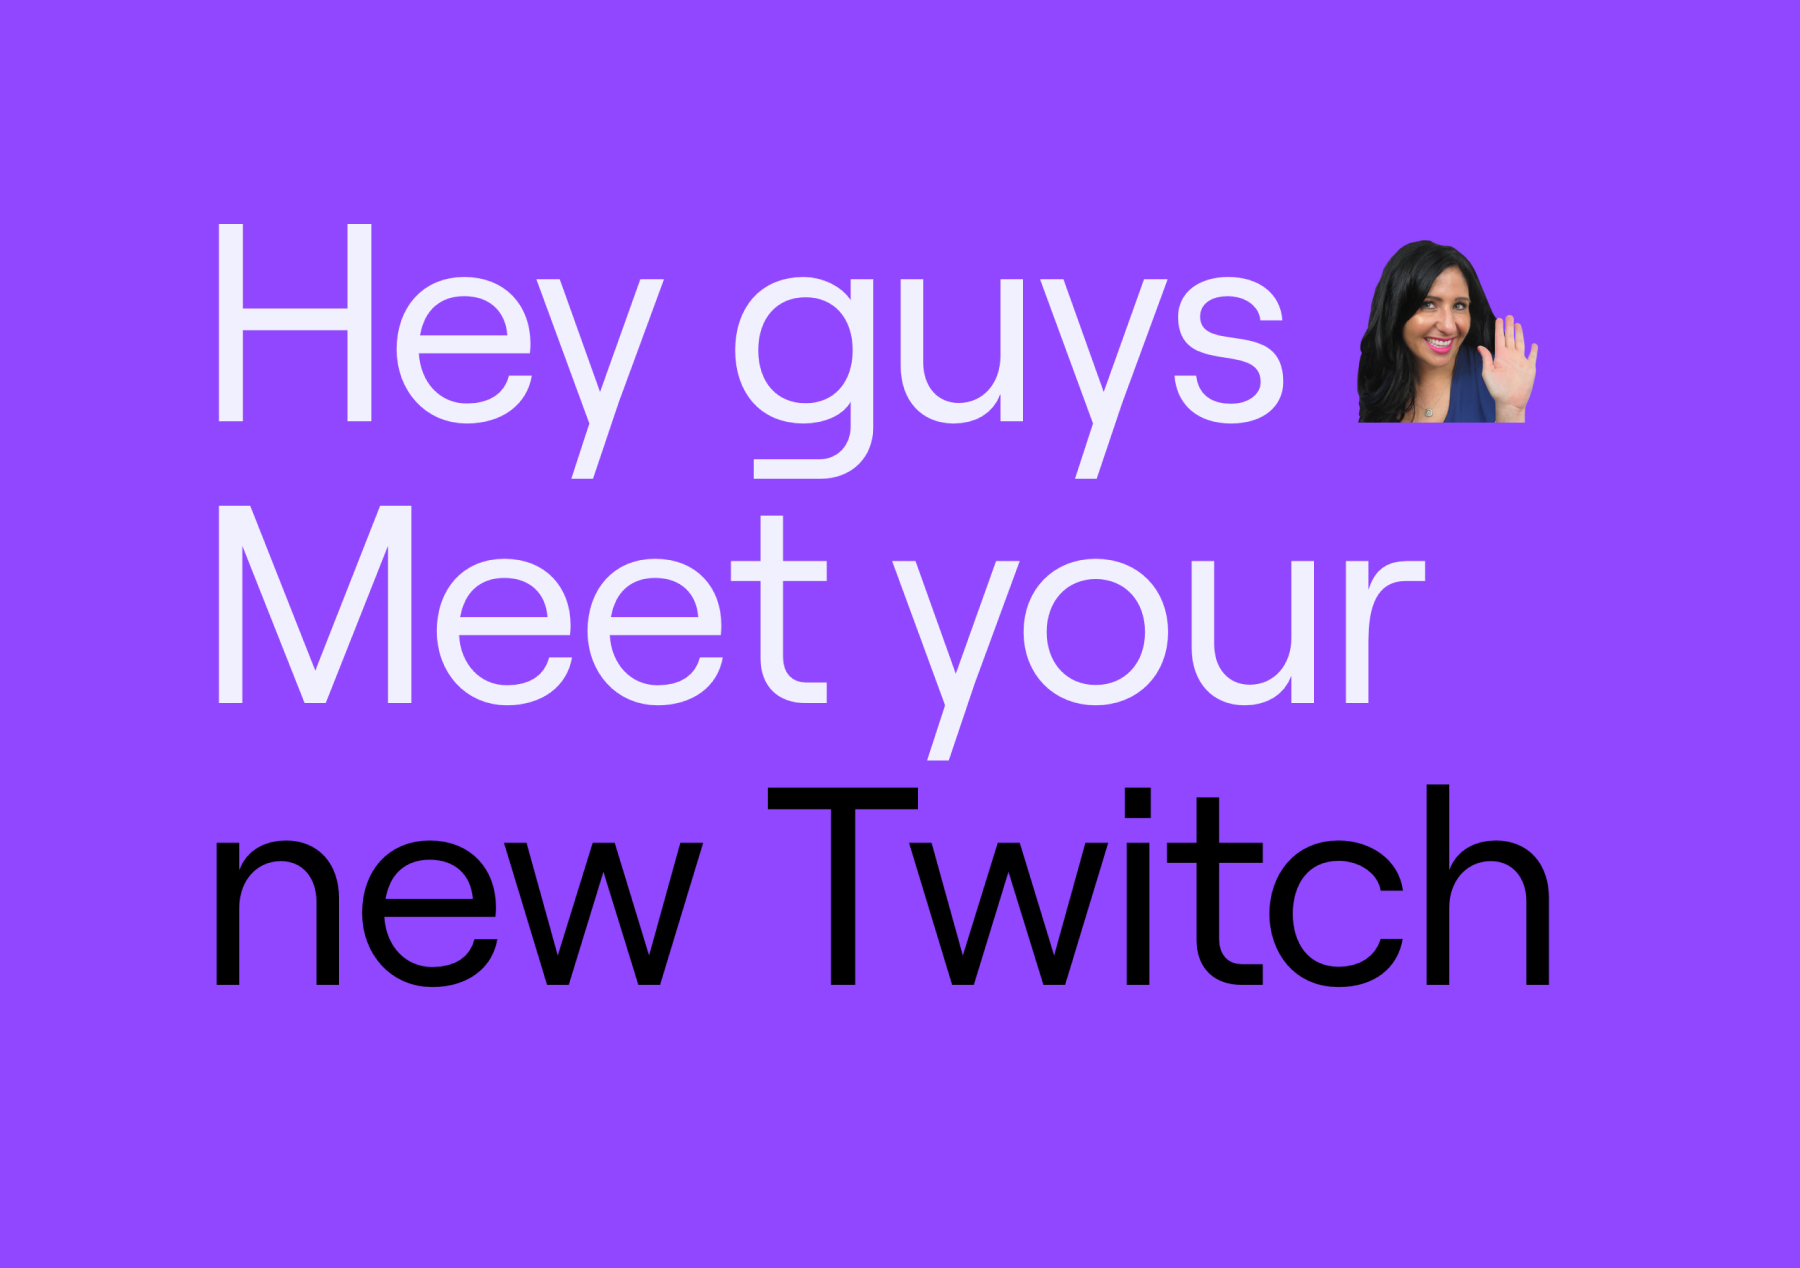 Meet your new Twitch